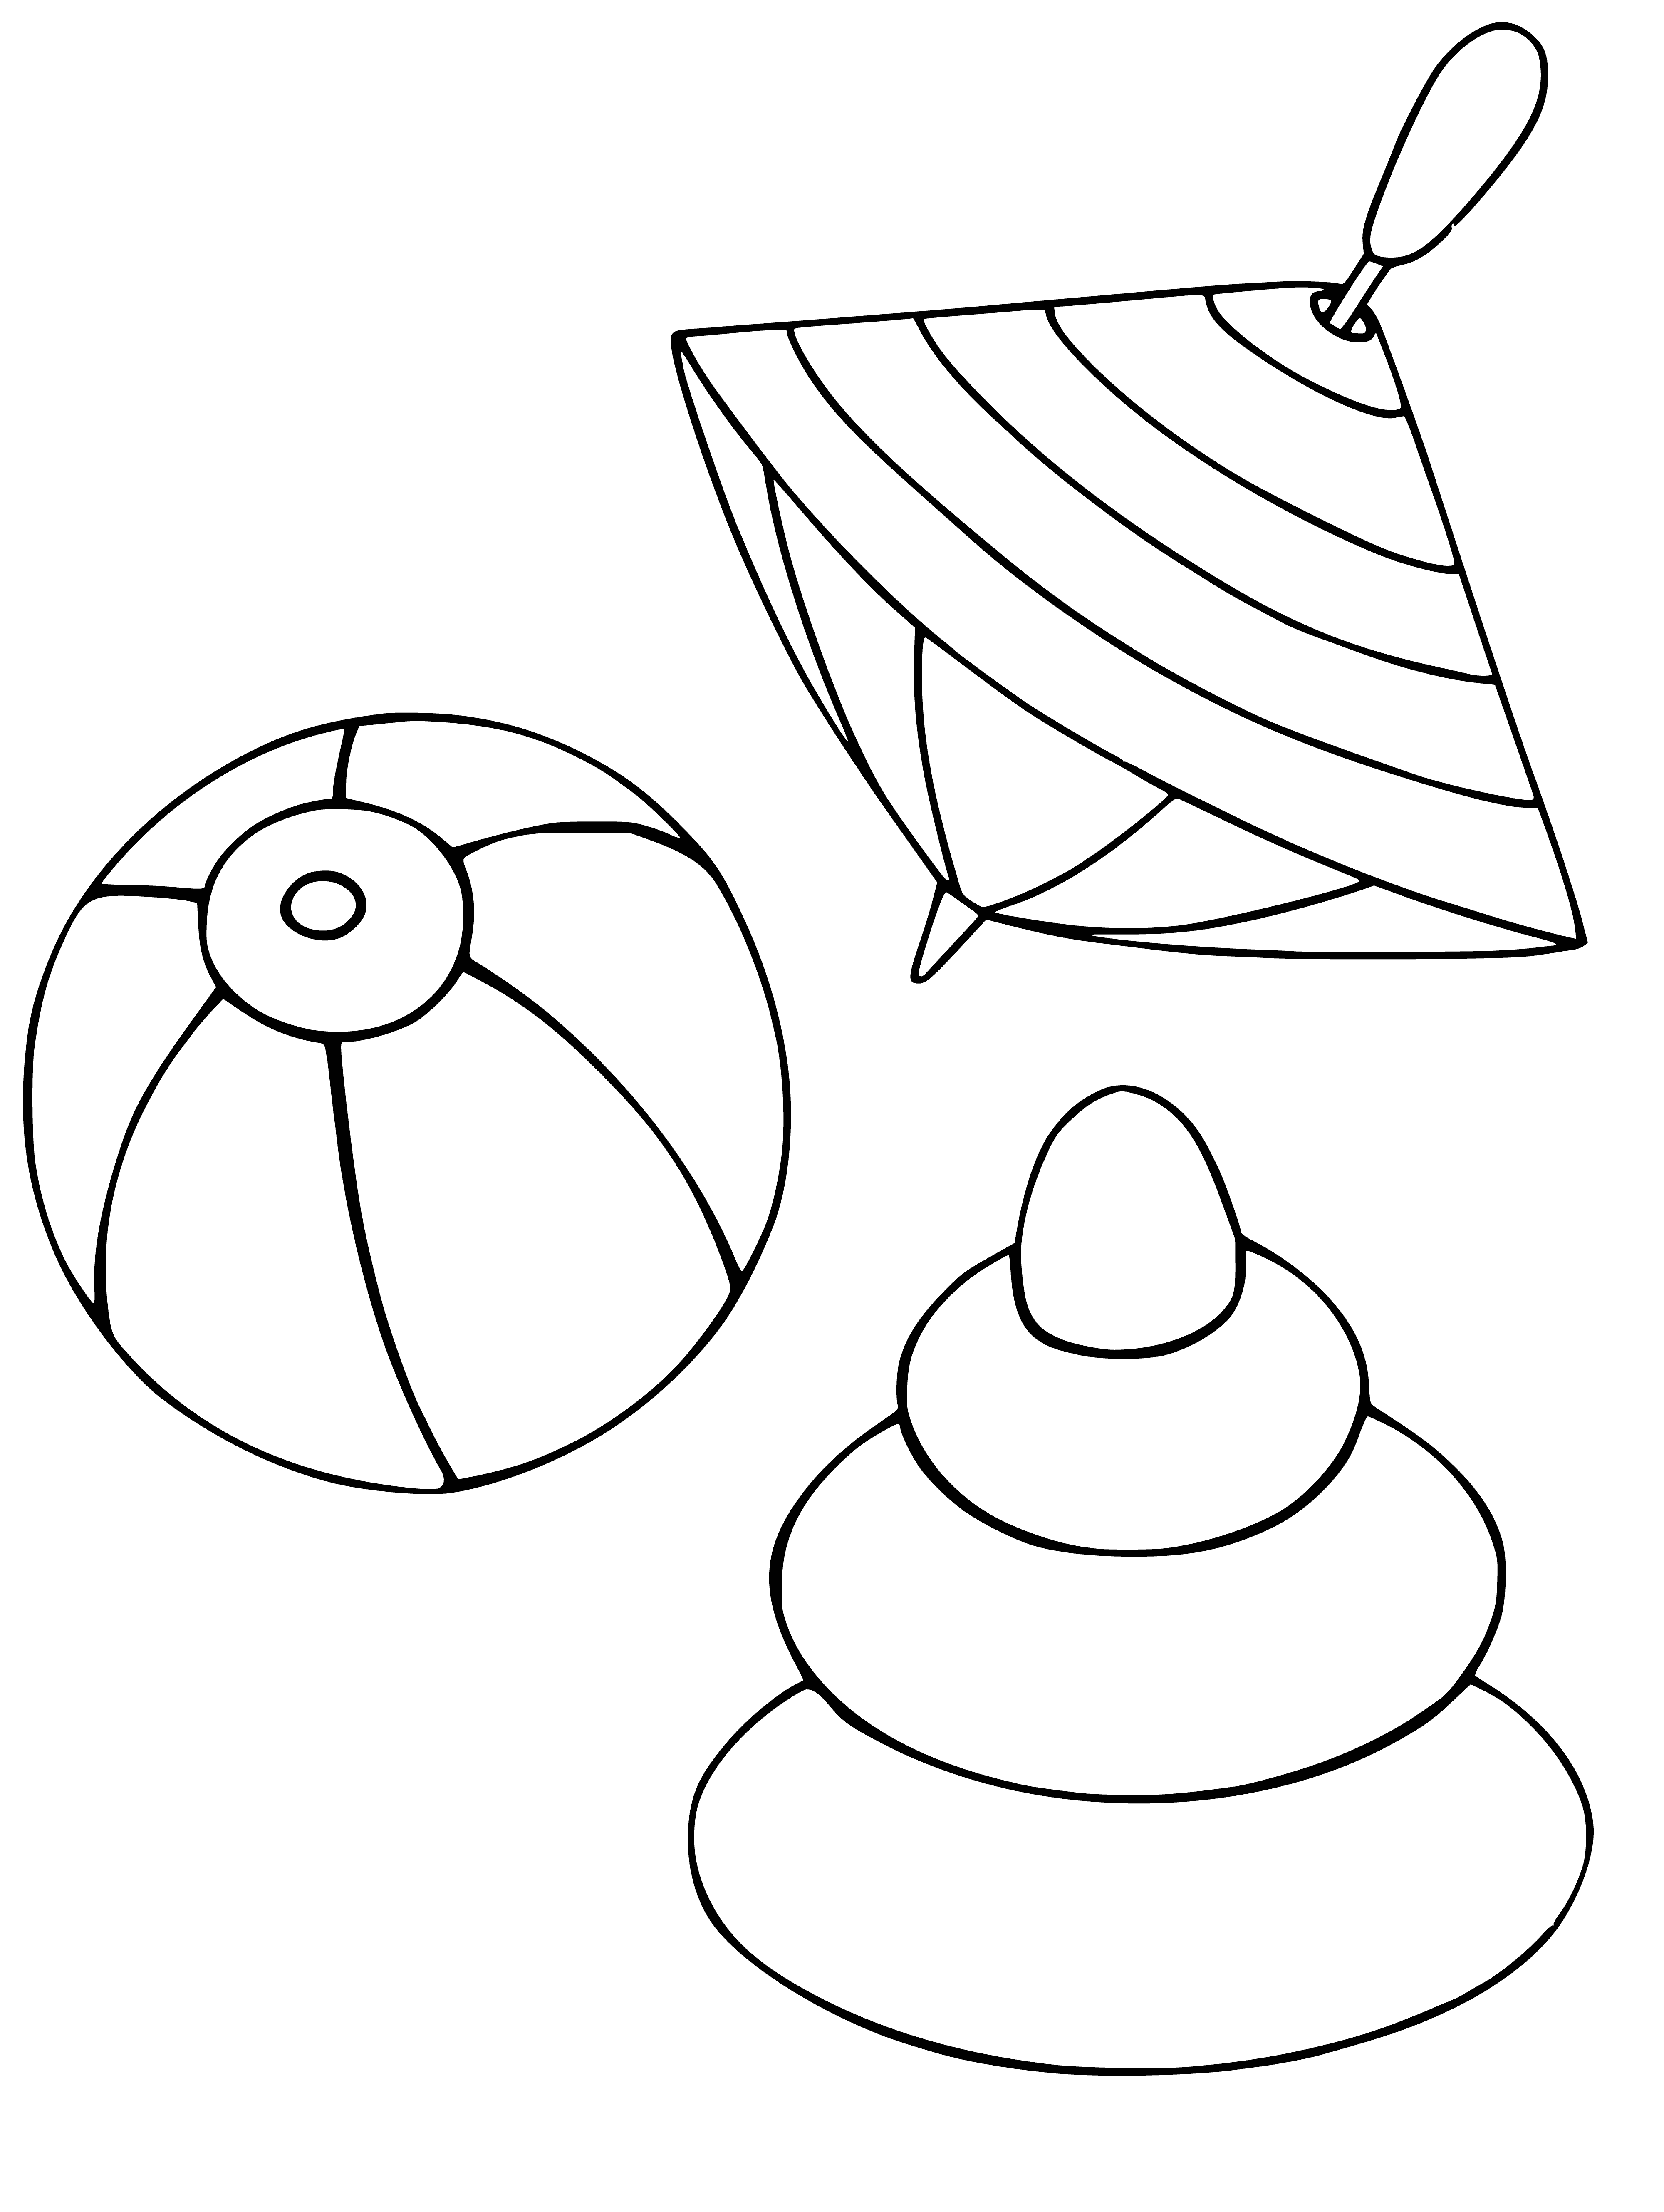 Spinning top, ball and whirligig coloring page